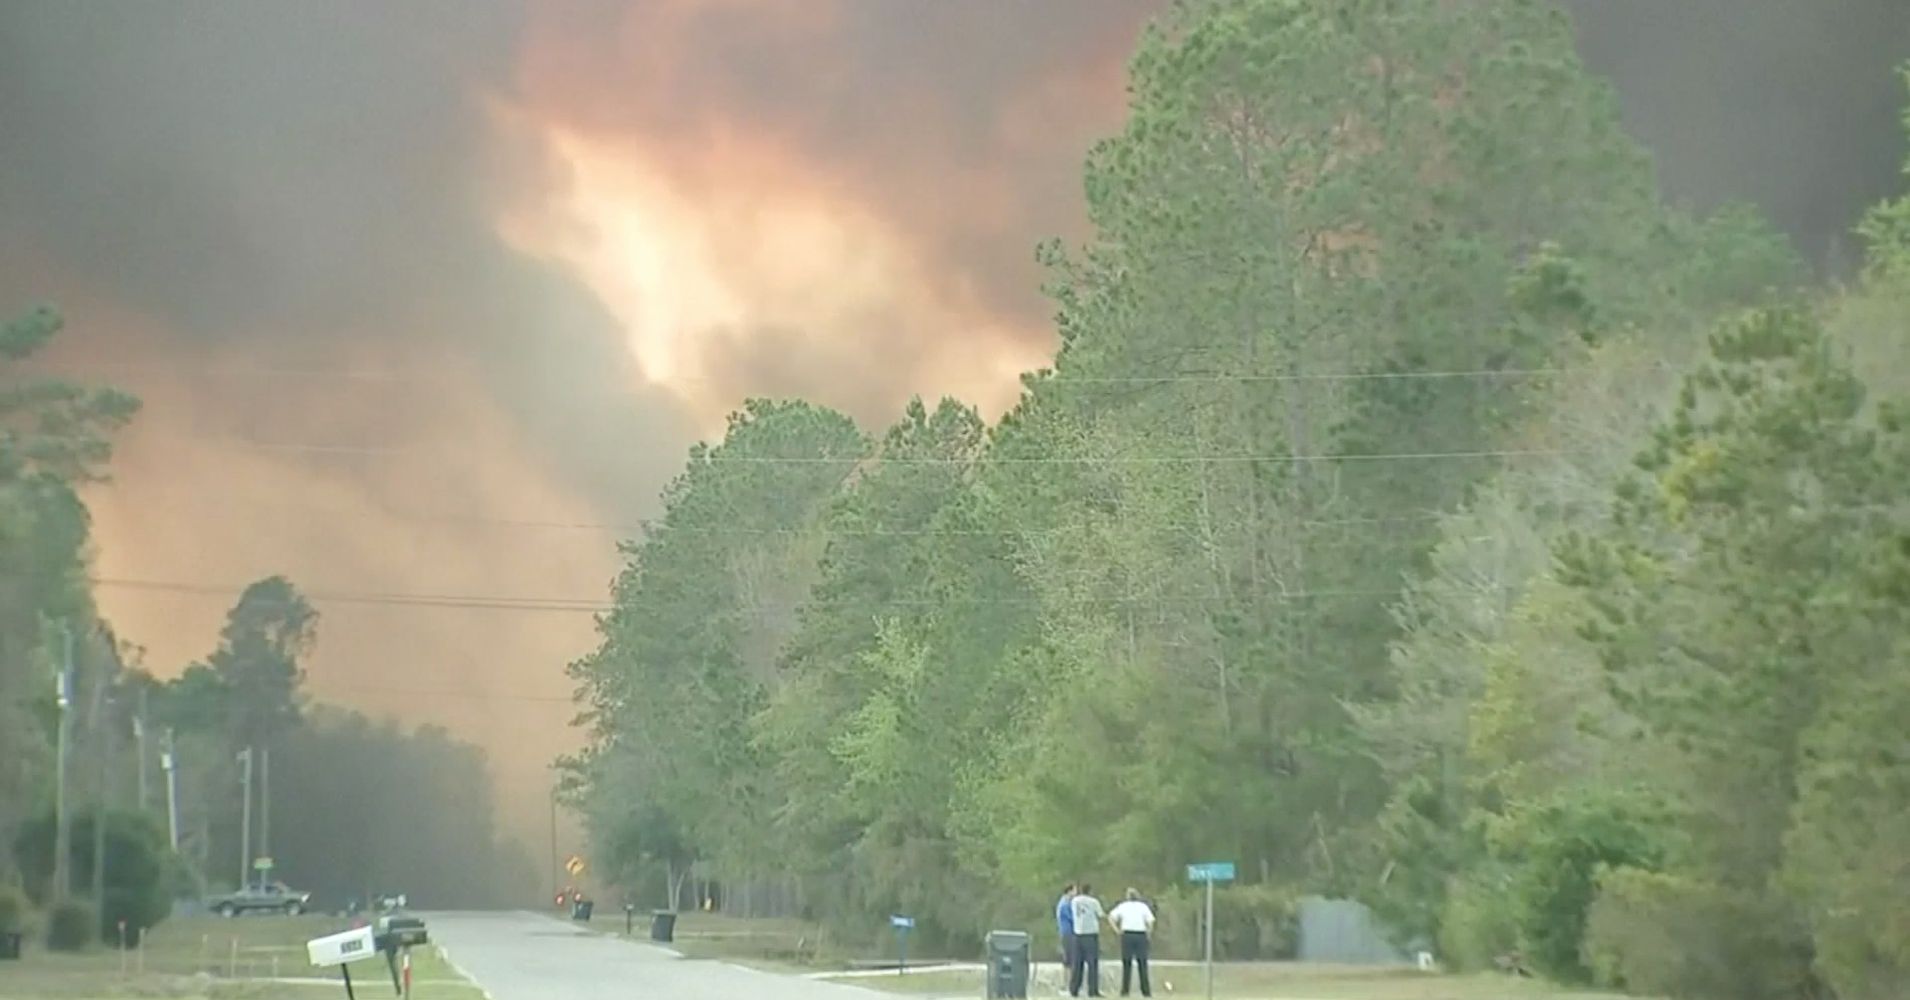 Book Burning Sparked Florida Wildfire That Destroyed 10 Homes